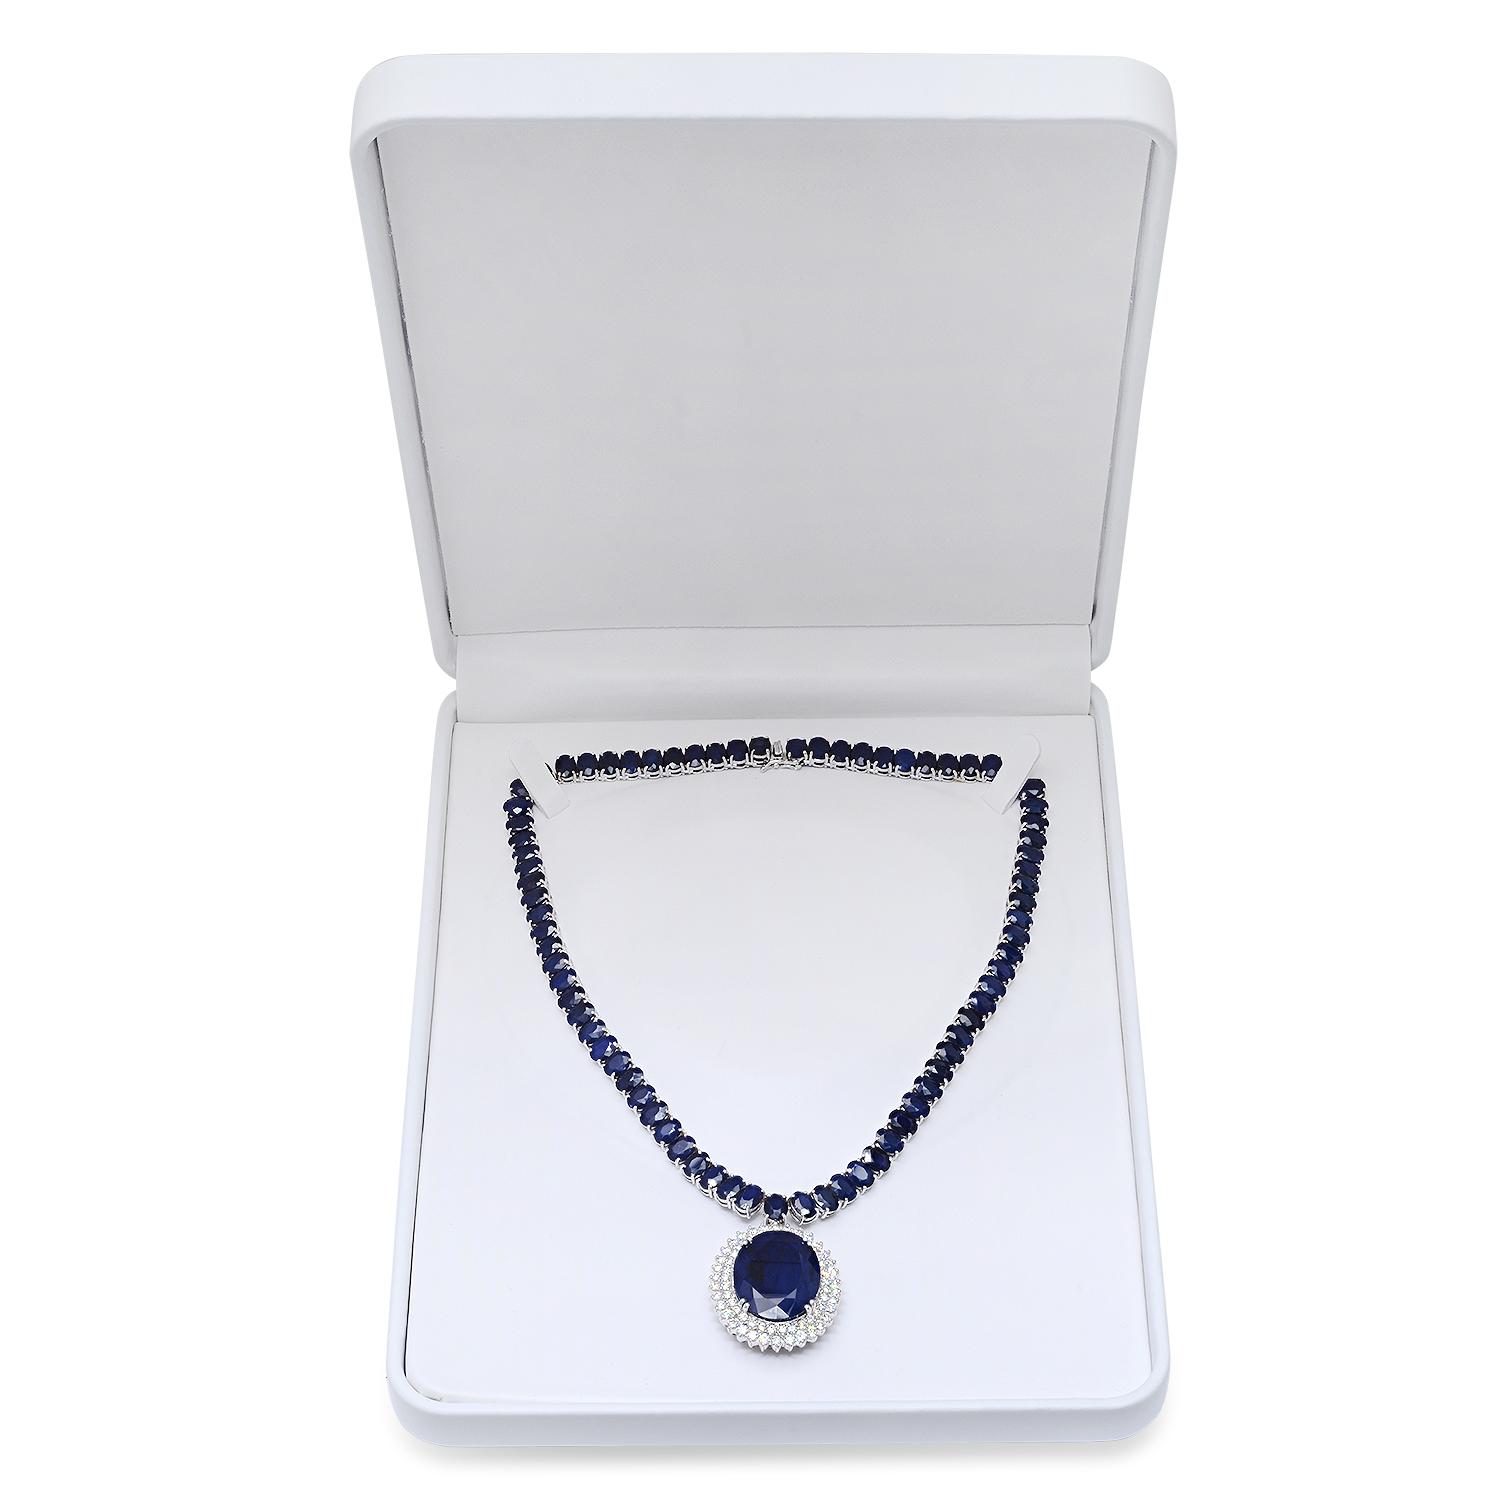 14K White Gold with 170.20ct Sapphire and 4.38ct Diamond Necklace